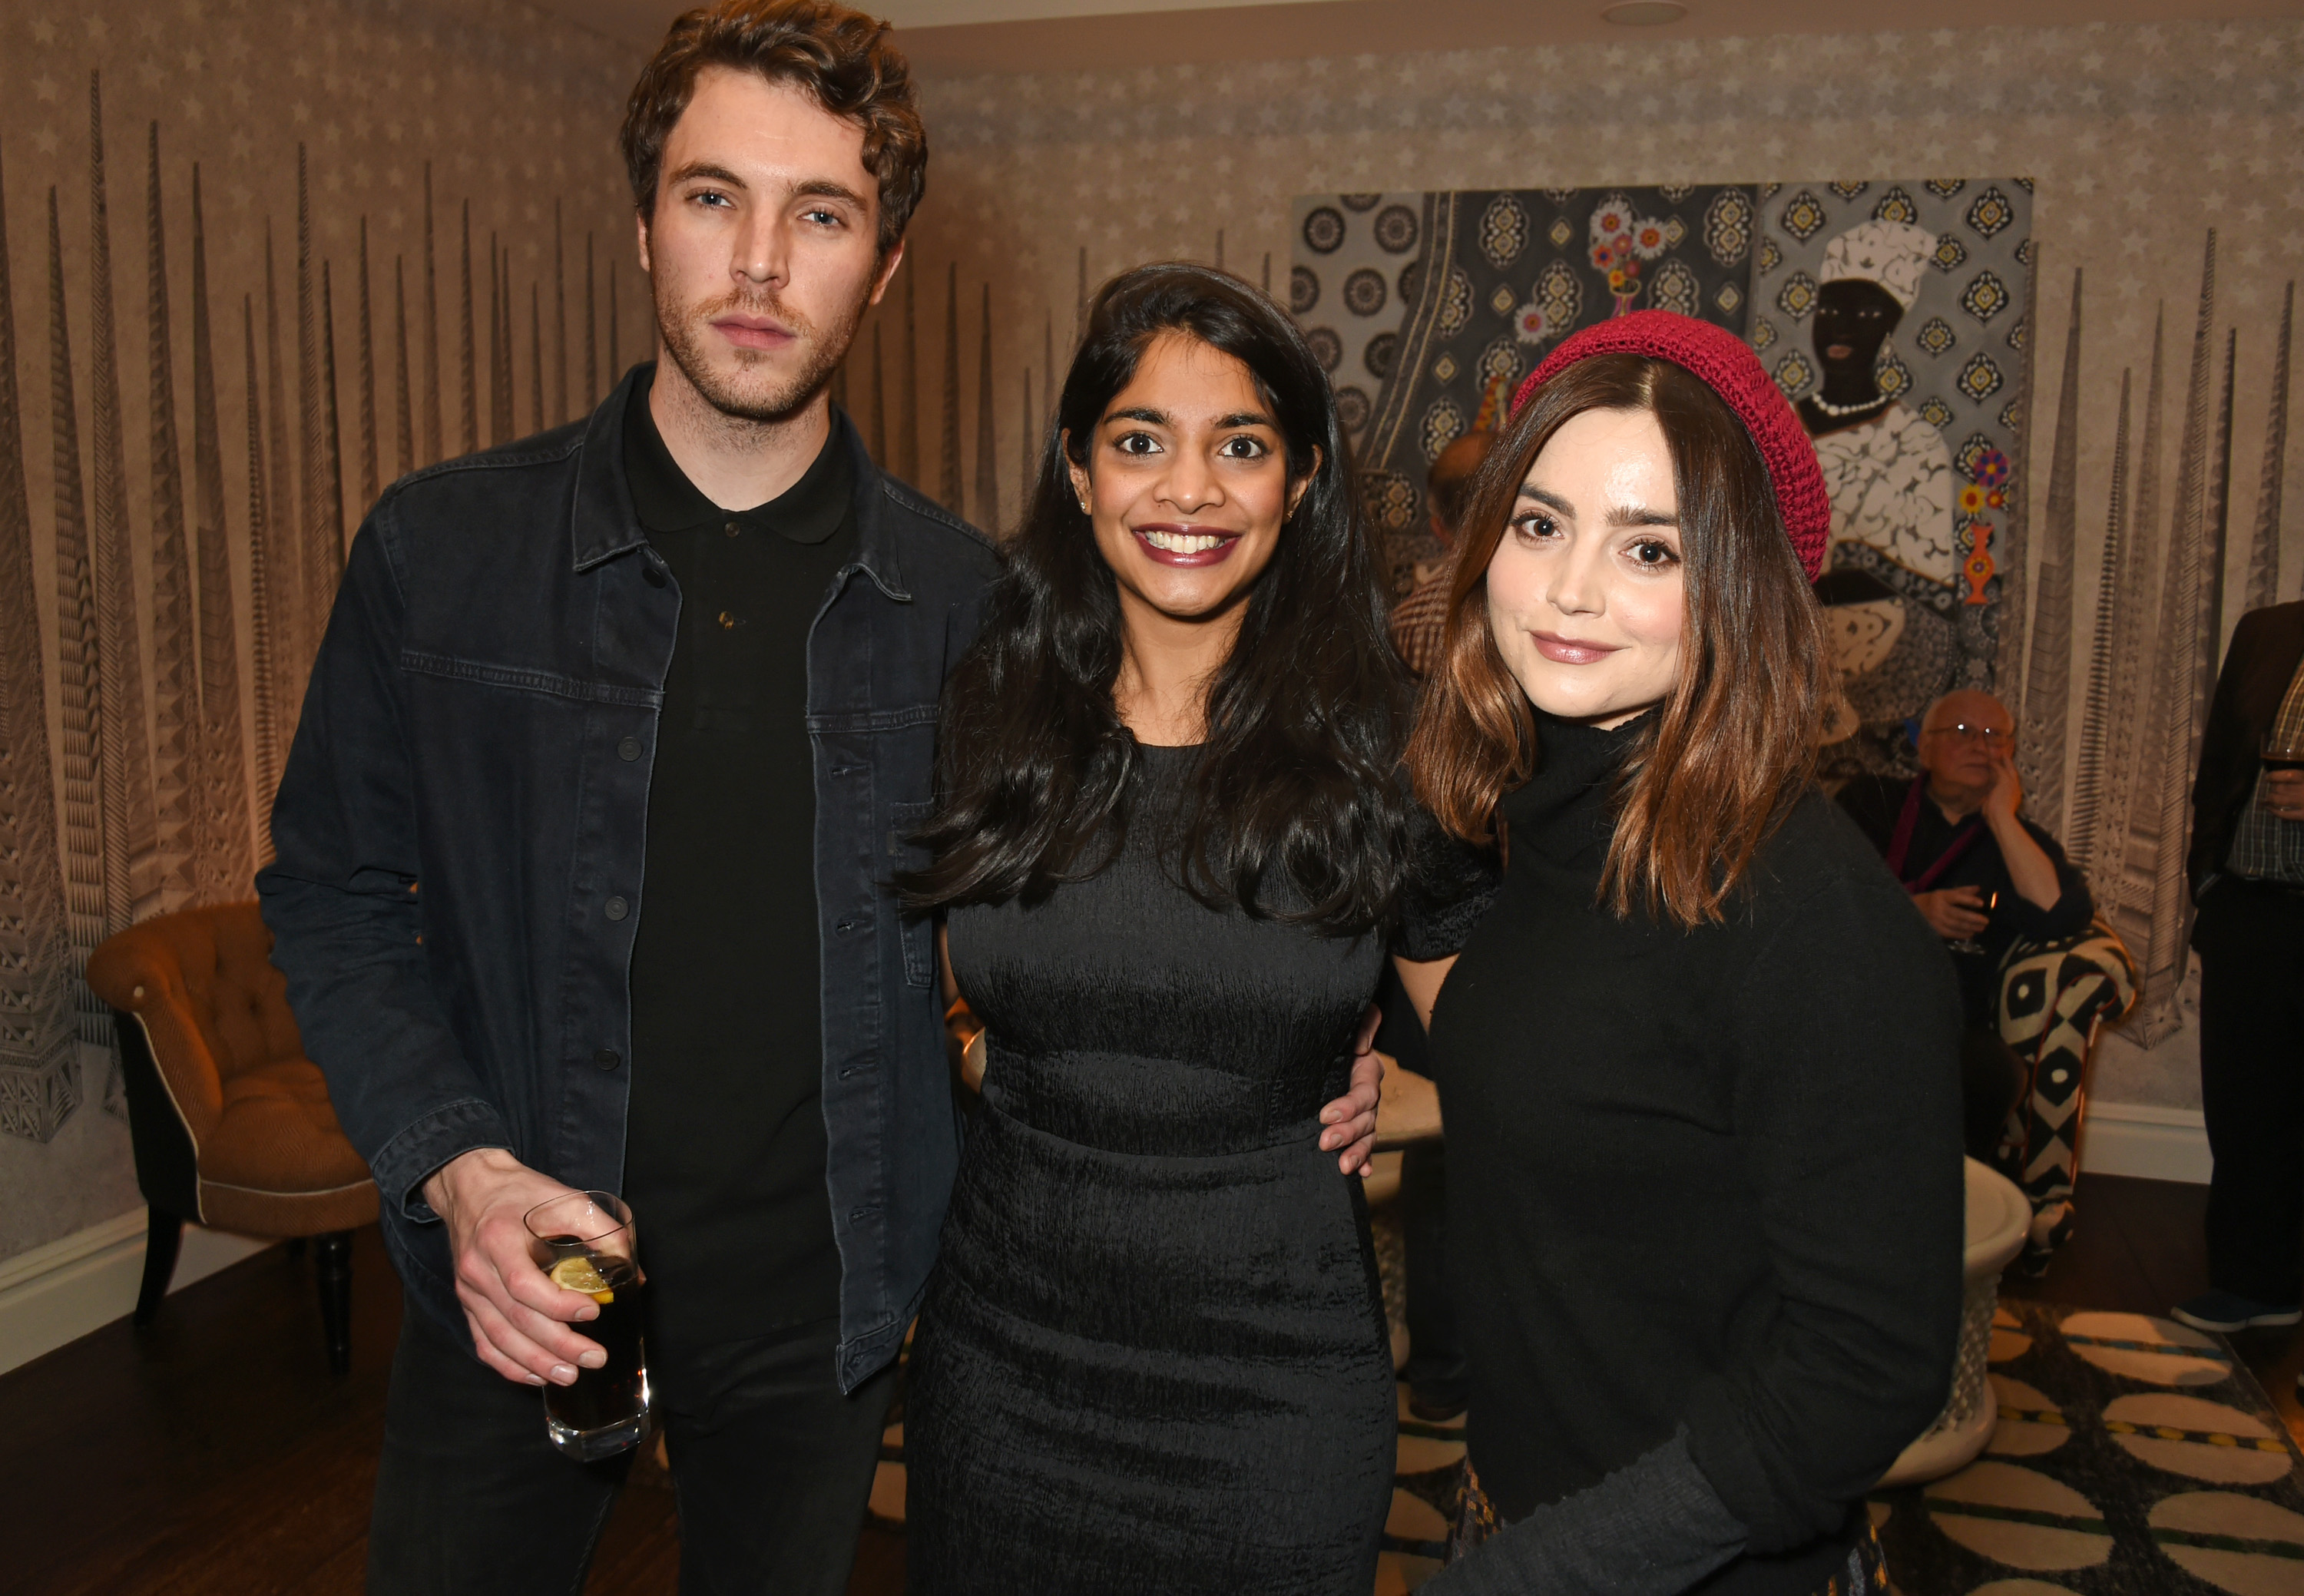 Tom Hughes, Amara Karan, and Jenna Coleman at the VIP screening of "Sing Street" on December 21, 2016 in London, England | Source: Getty Images